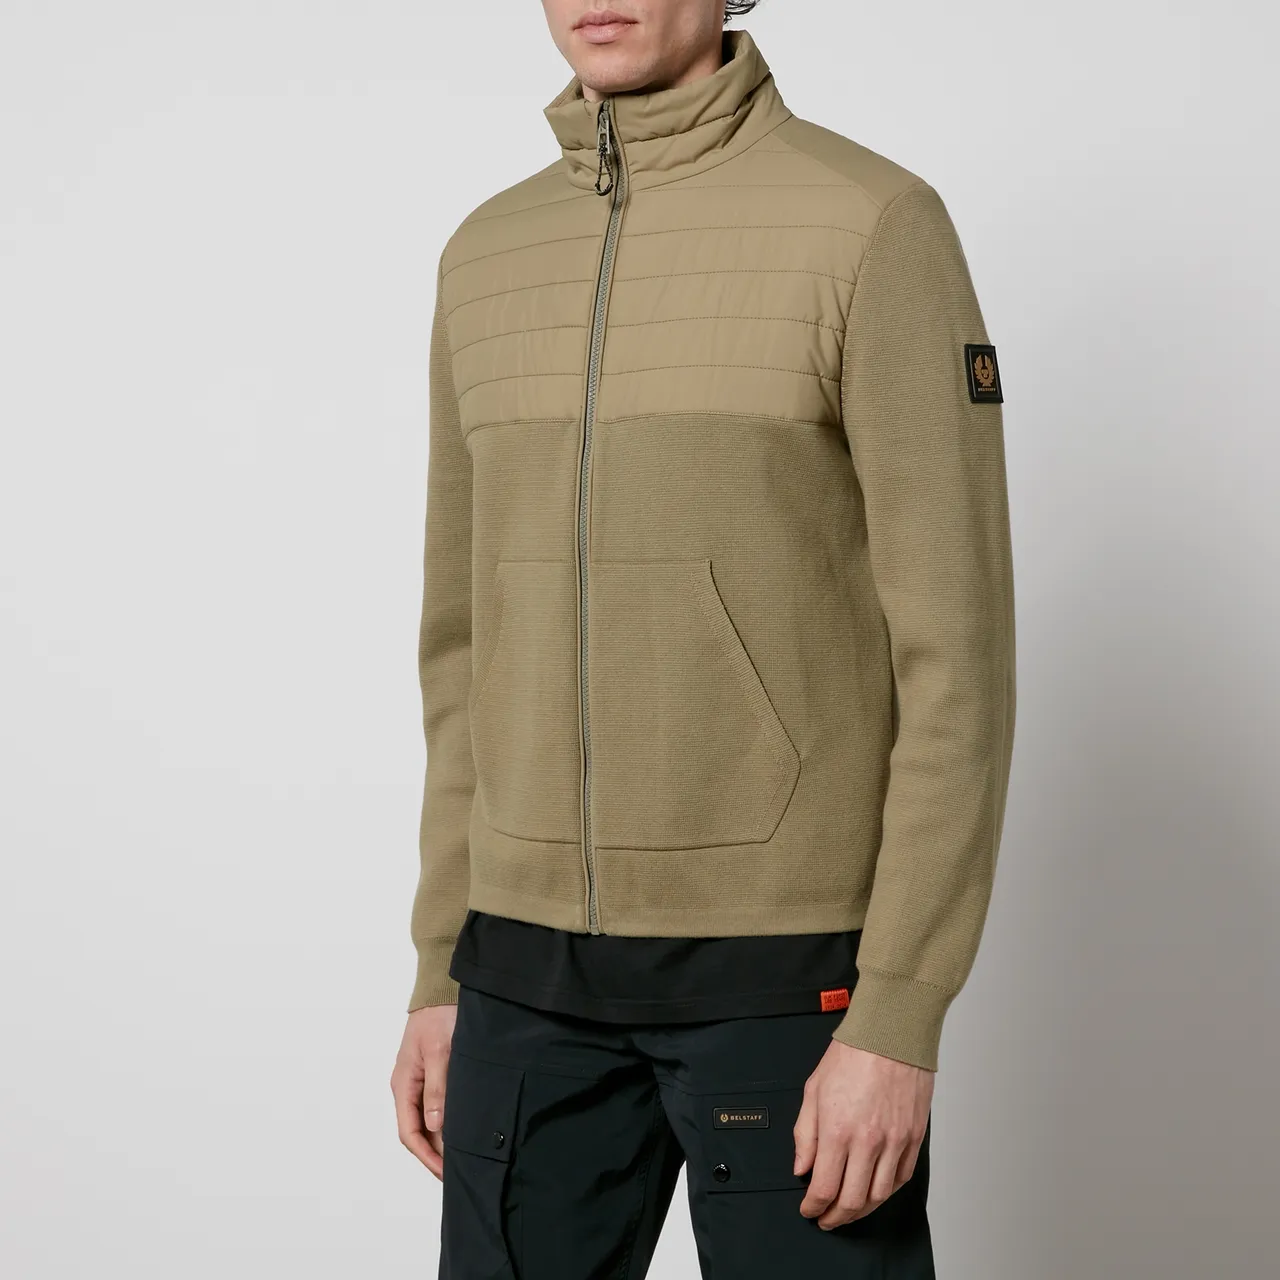 Belstaff Quad Cotton and Shell Jacket - IT 46/